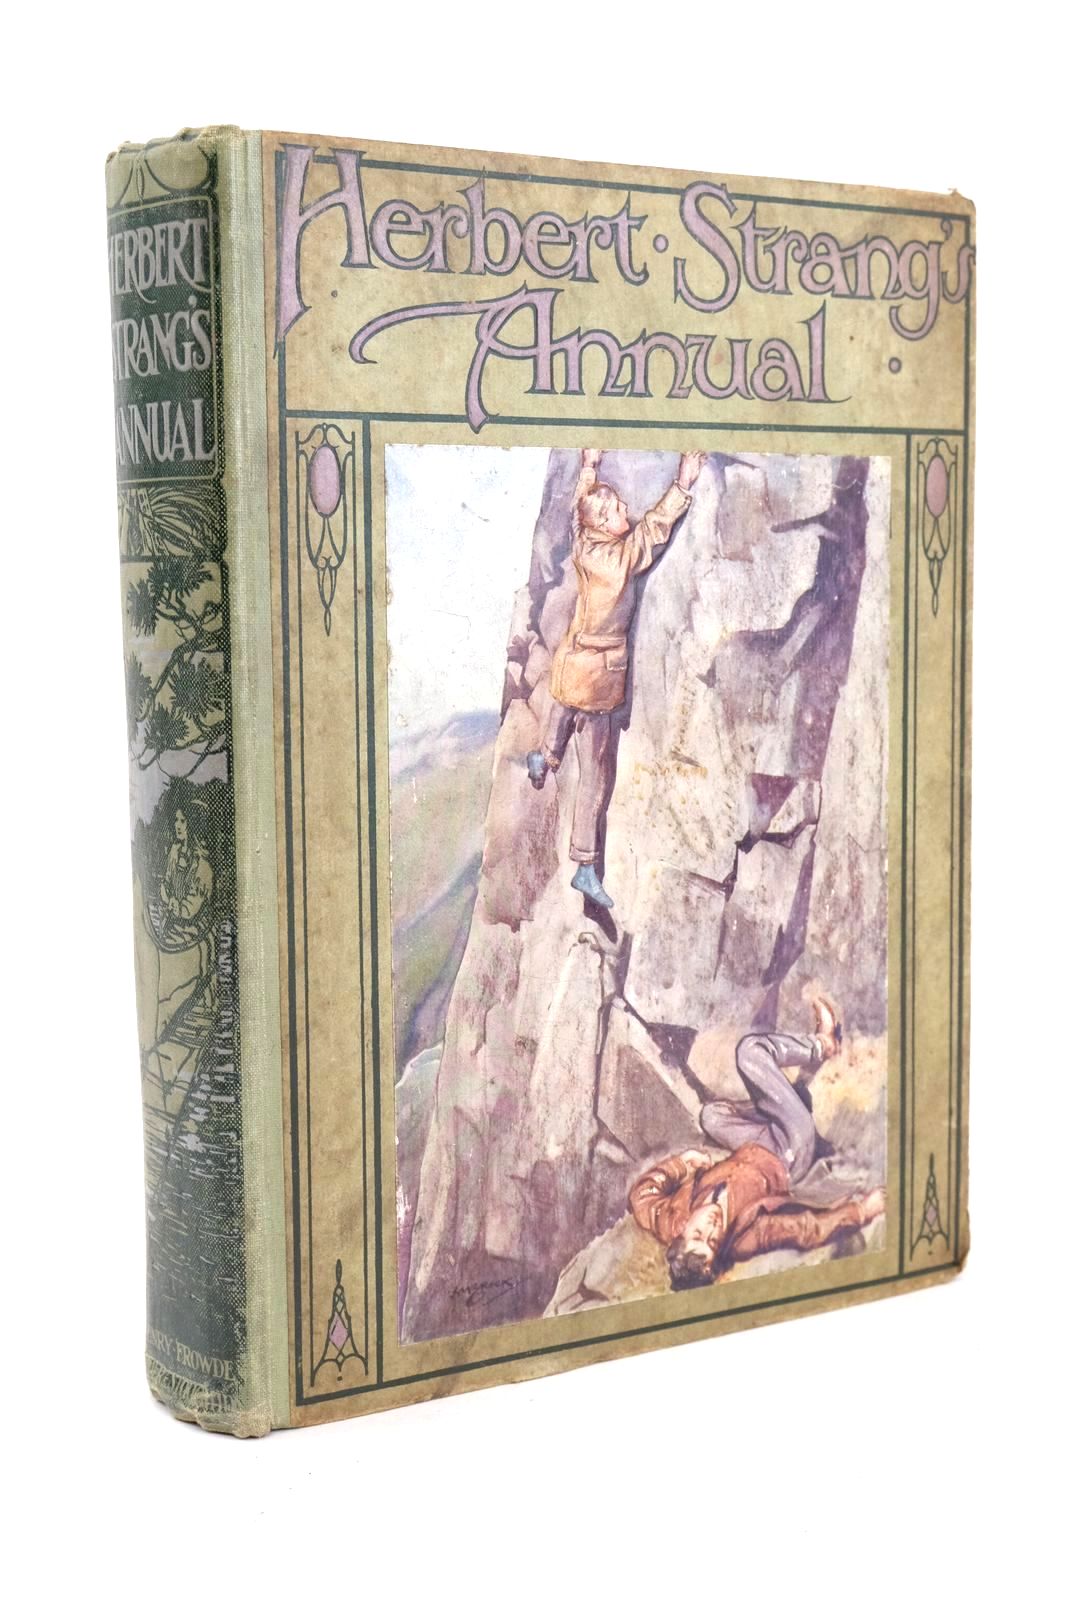 Photo of HERBERT STRANG'S ANNUAL 1914 written by Strang, Herbert Rhoades, Walter C. Avery, Harold Bevan, Tom Gilson, Captain Charles et al, illustrated by Brock, H.M. Brock, C.E. Rowlandson, G.D. Cuneo, Cyrus et al., published by Hodder &amp; Stoughton, Henry Frowde (STOCK CODE: 1325847)  for sale by Stella & Rose's Books